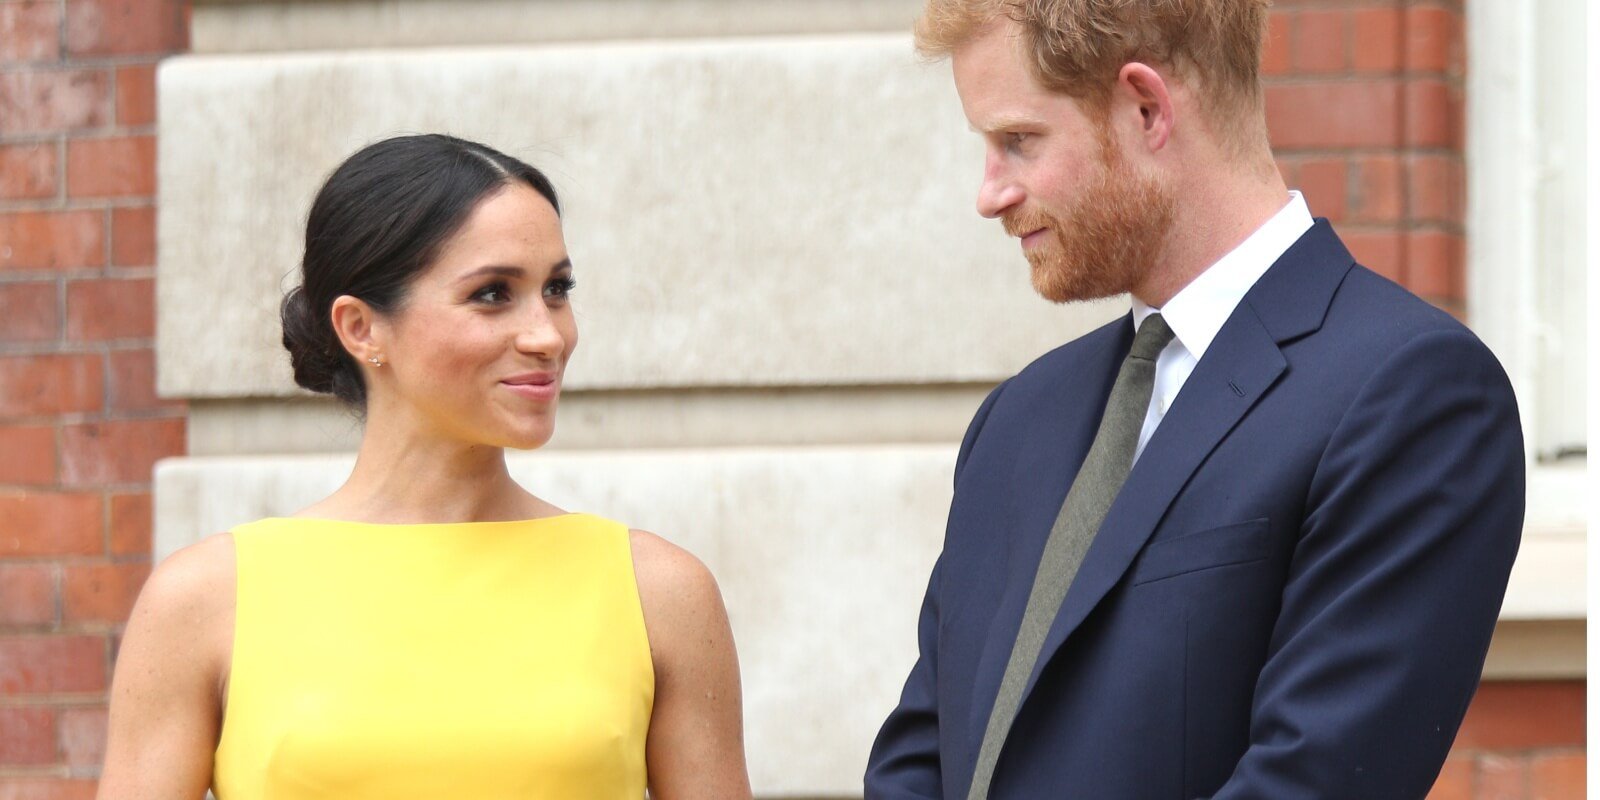 Prince Harry, Duke of Sussex and Meghan, Duchess of Sussex arrive to meet youngsters from across the Commonwealth as they attend the Your Commonwealth Youth Challenge reception at Marlborough House on July 05, 2018.